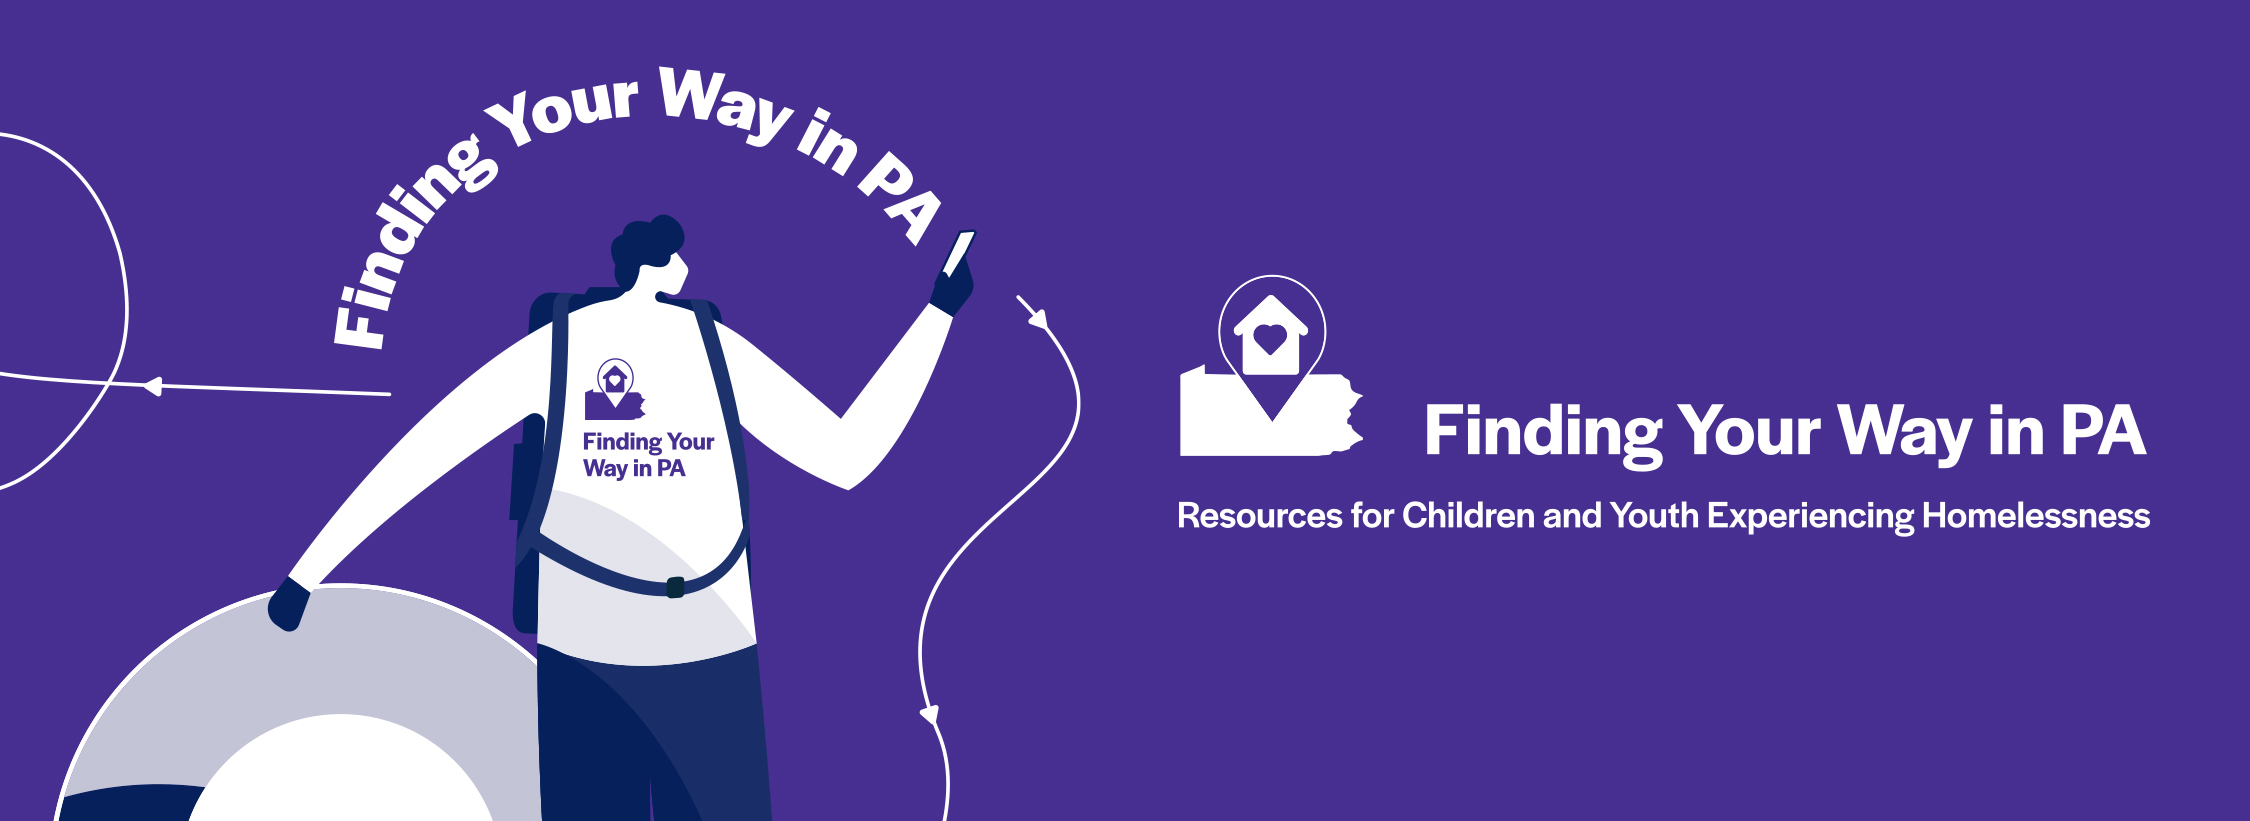 Finding Your Way in P A app Resources for Children and Youth Experiencing Homelessness